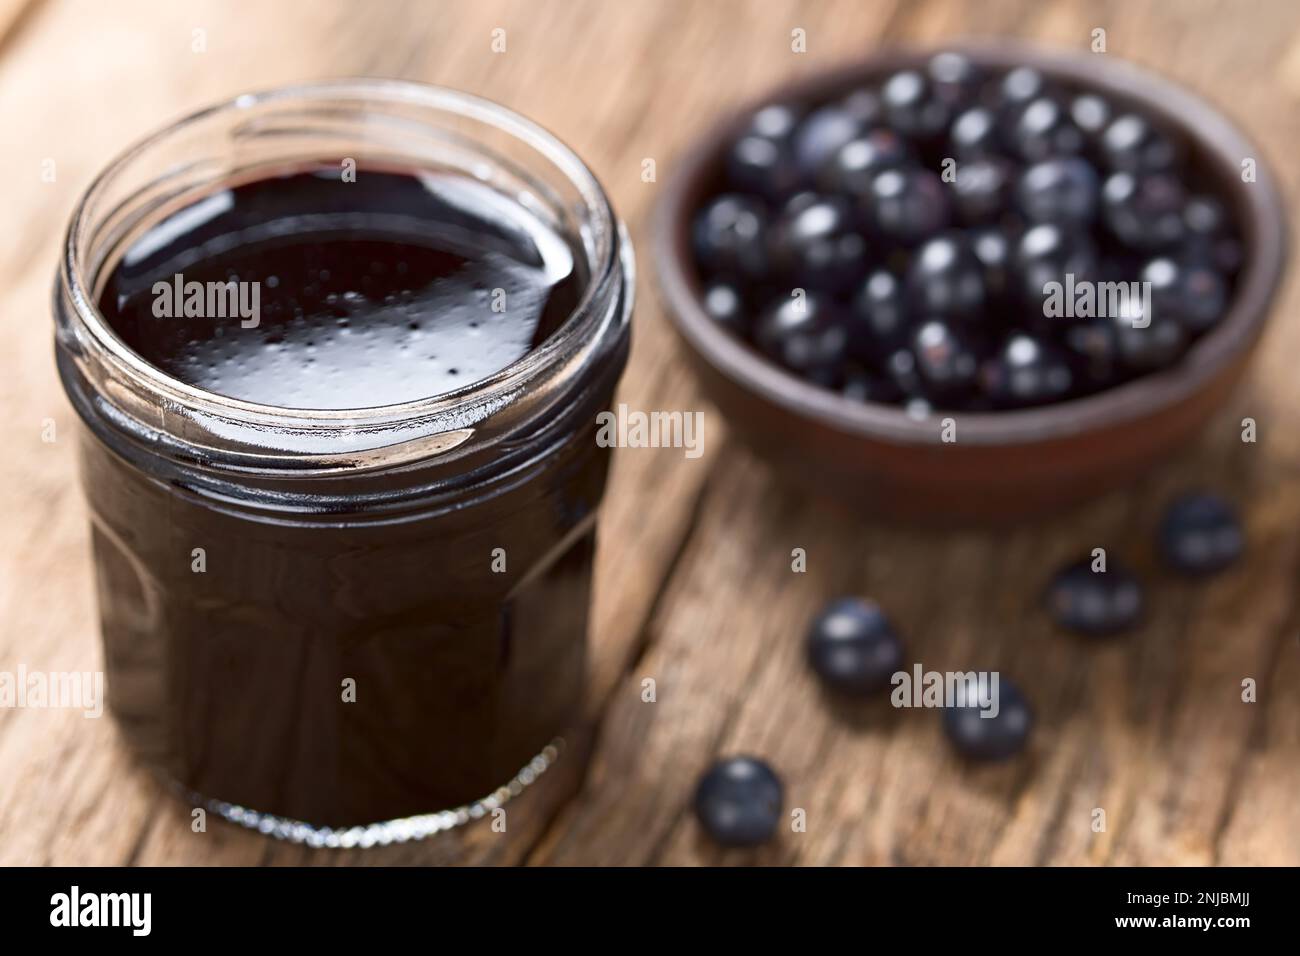 Fresh homemade jelly made of Patagonian Calafate berries (lat. Berberis heterophylla) in glass jar,  raw berries on the side and in the back Stock Photo